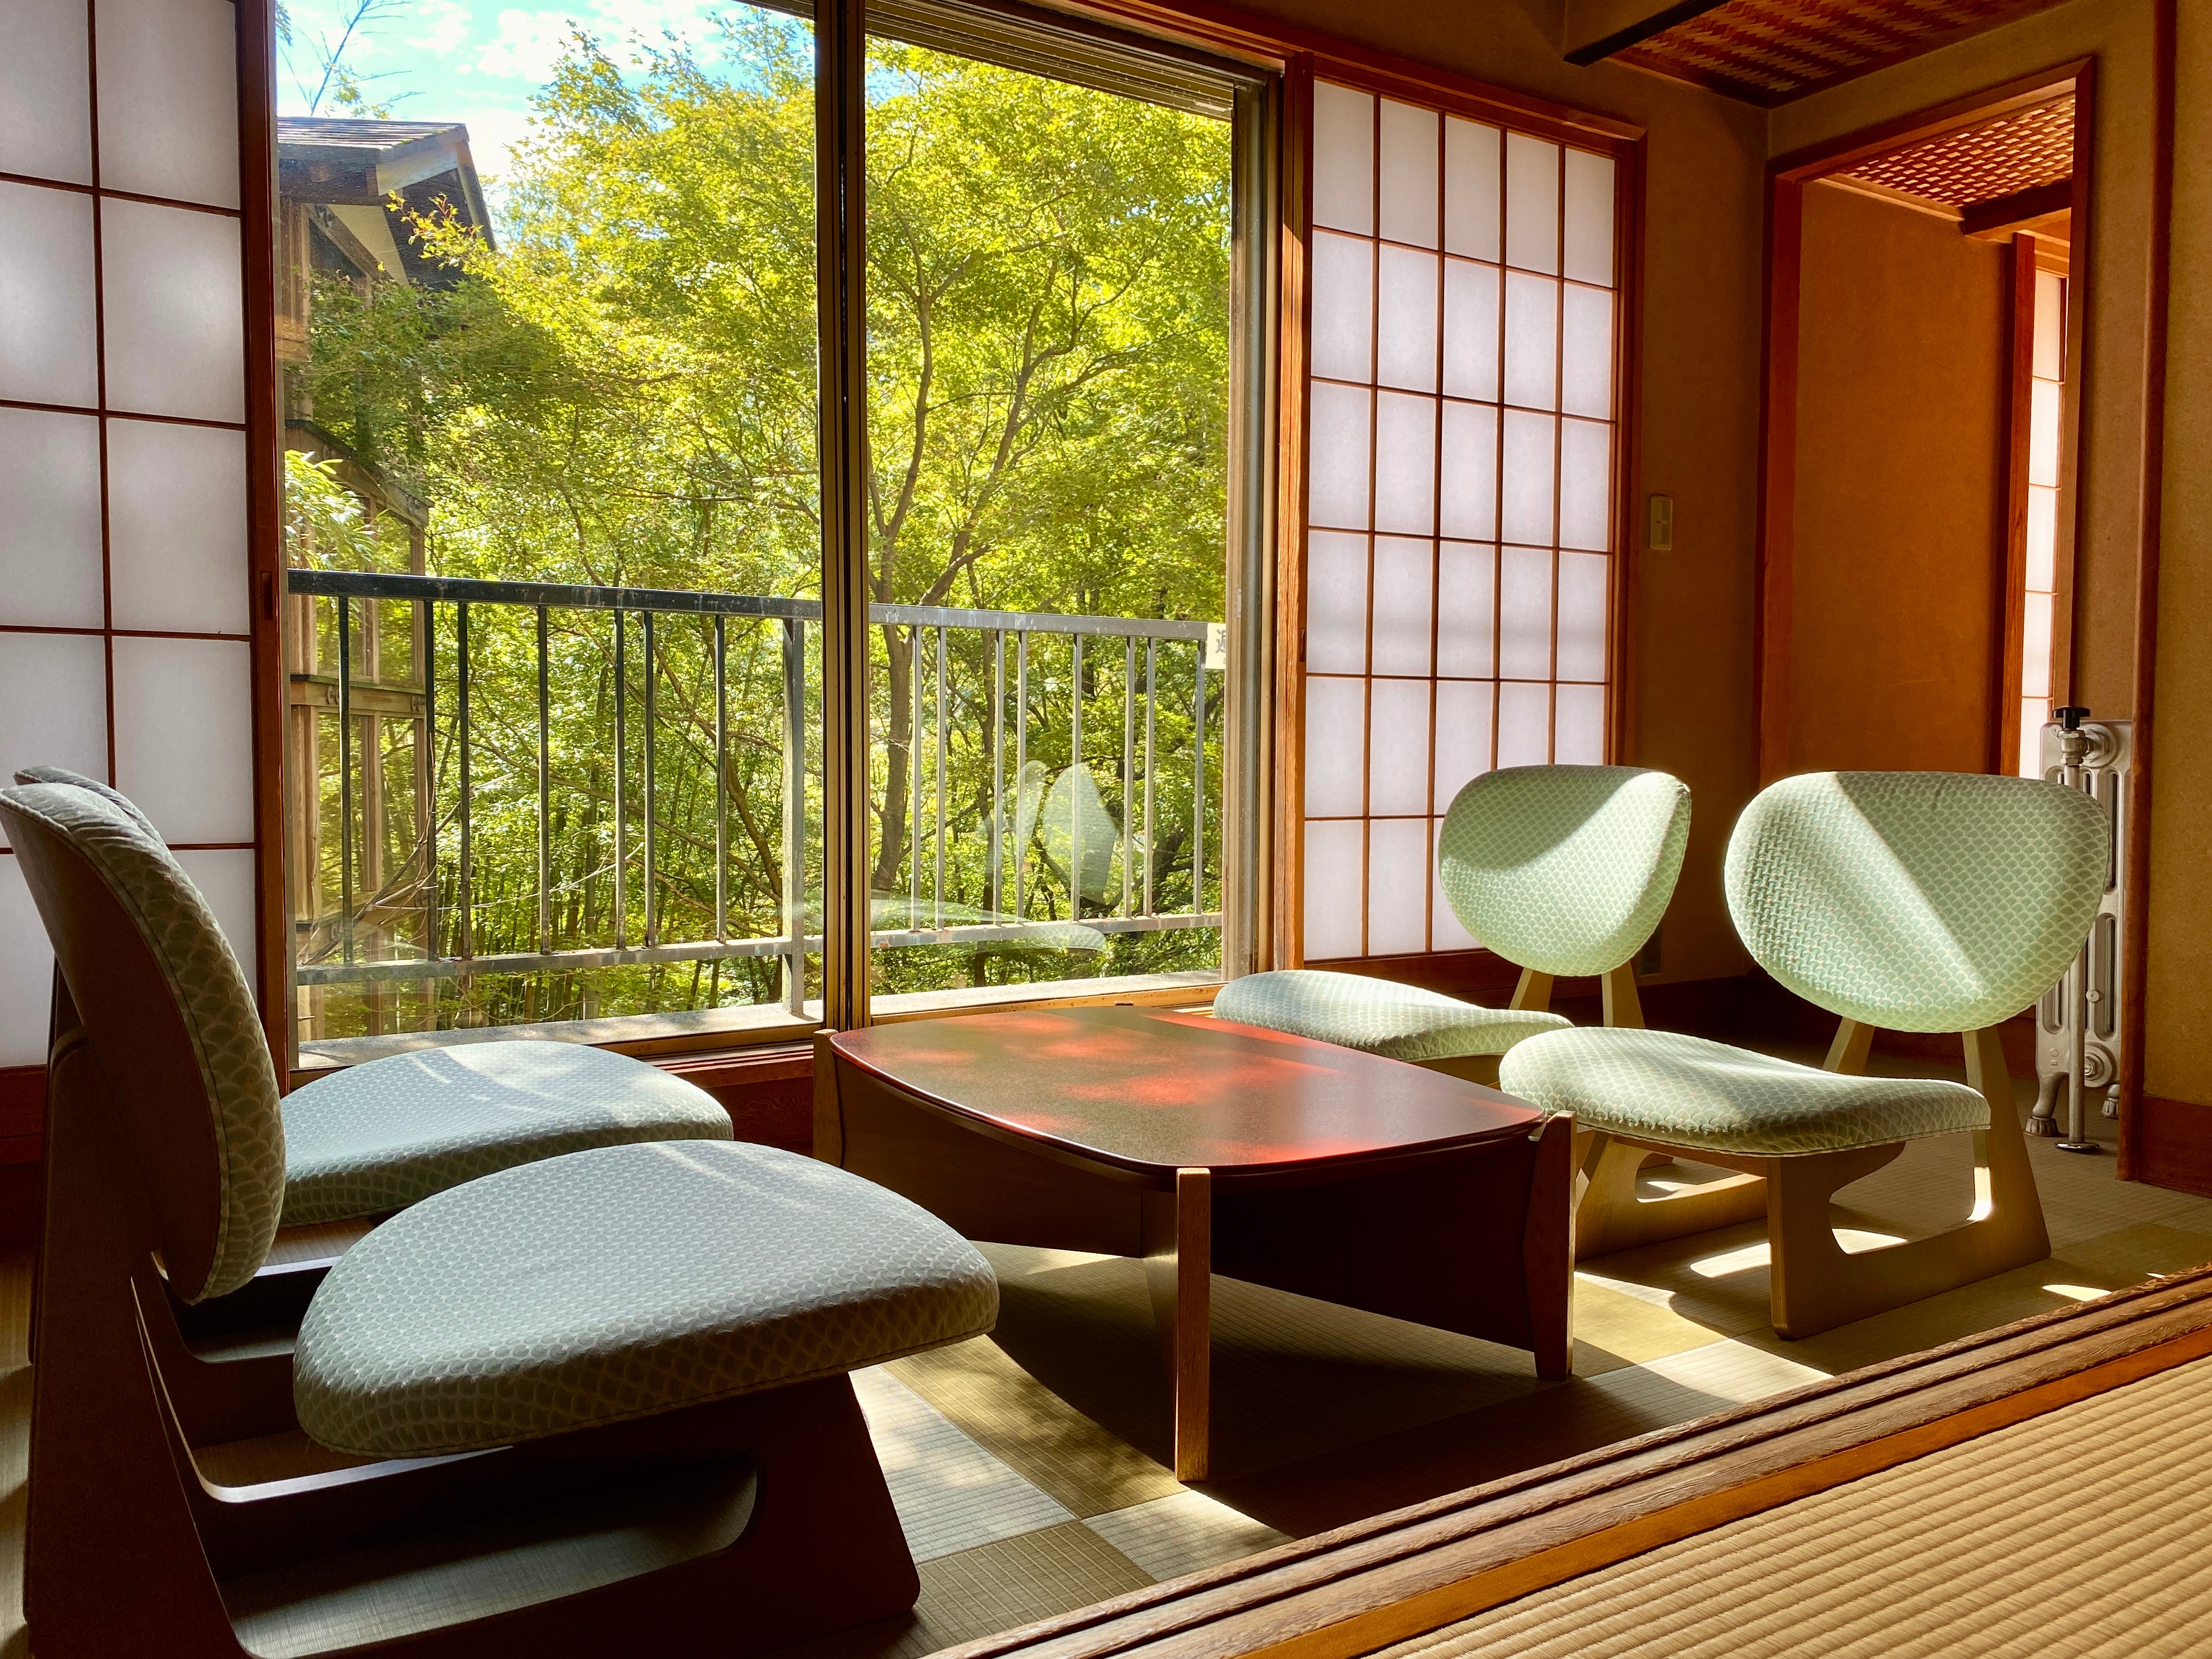 Two 12 tatami mat rooms + a special room with a rock garden and a cypress bath